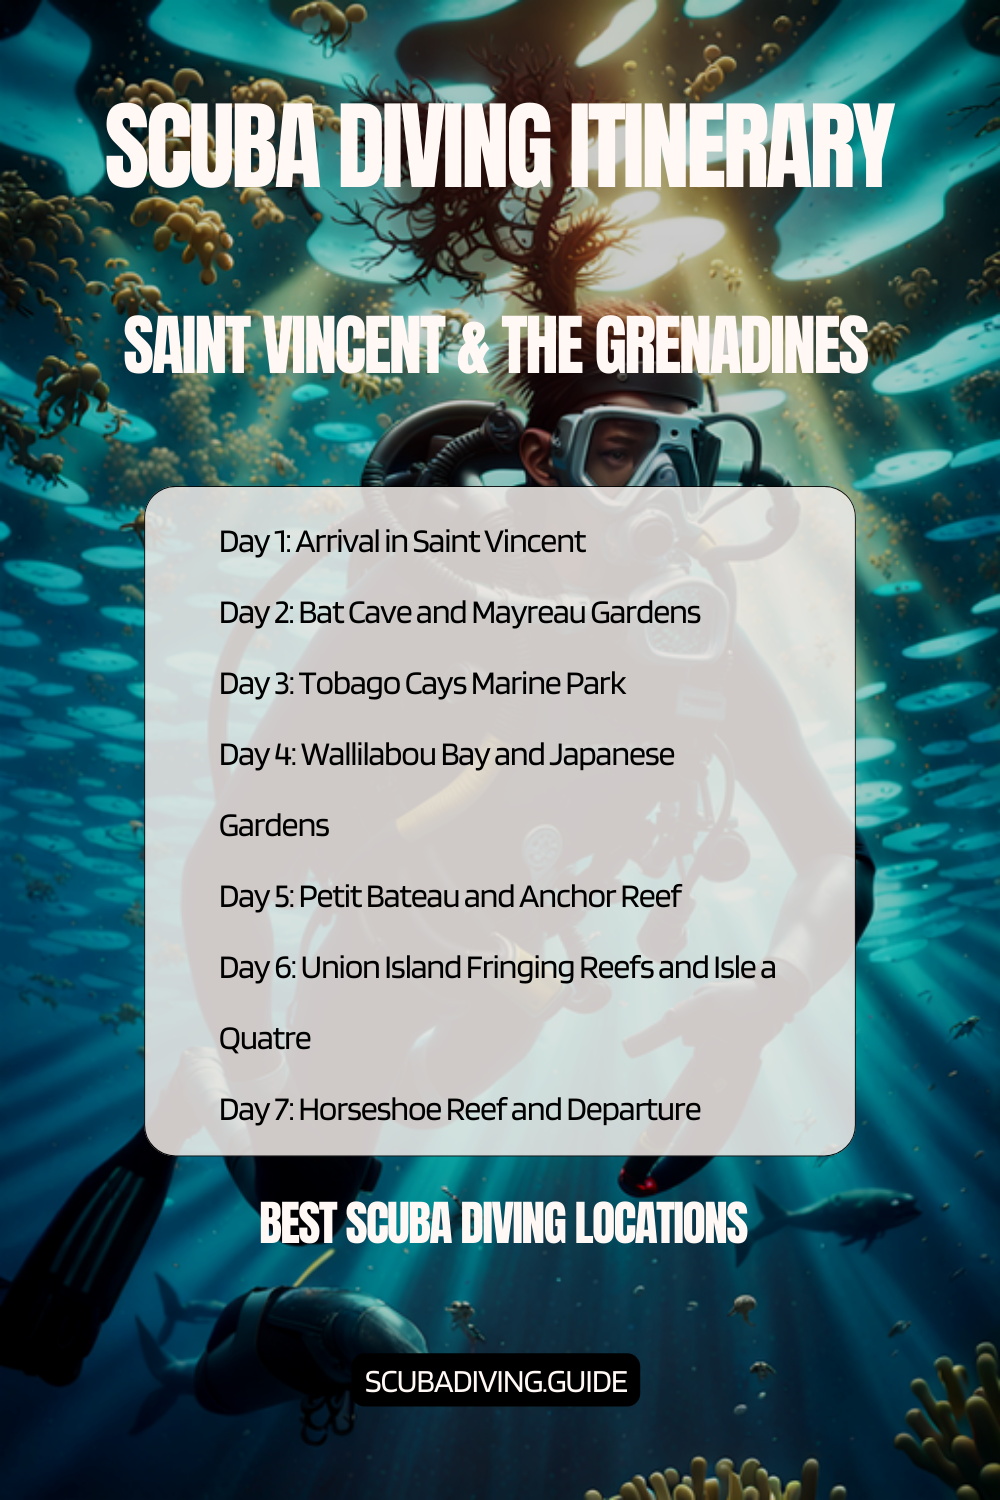 Saint Vincent & The Grenadines Recommended Scuba Diving Itinerary